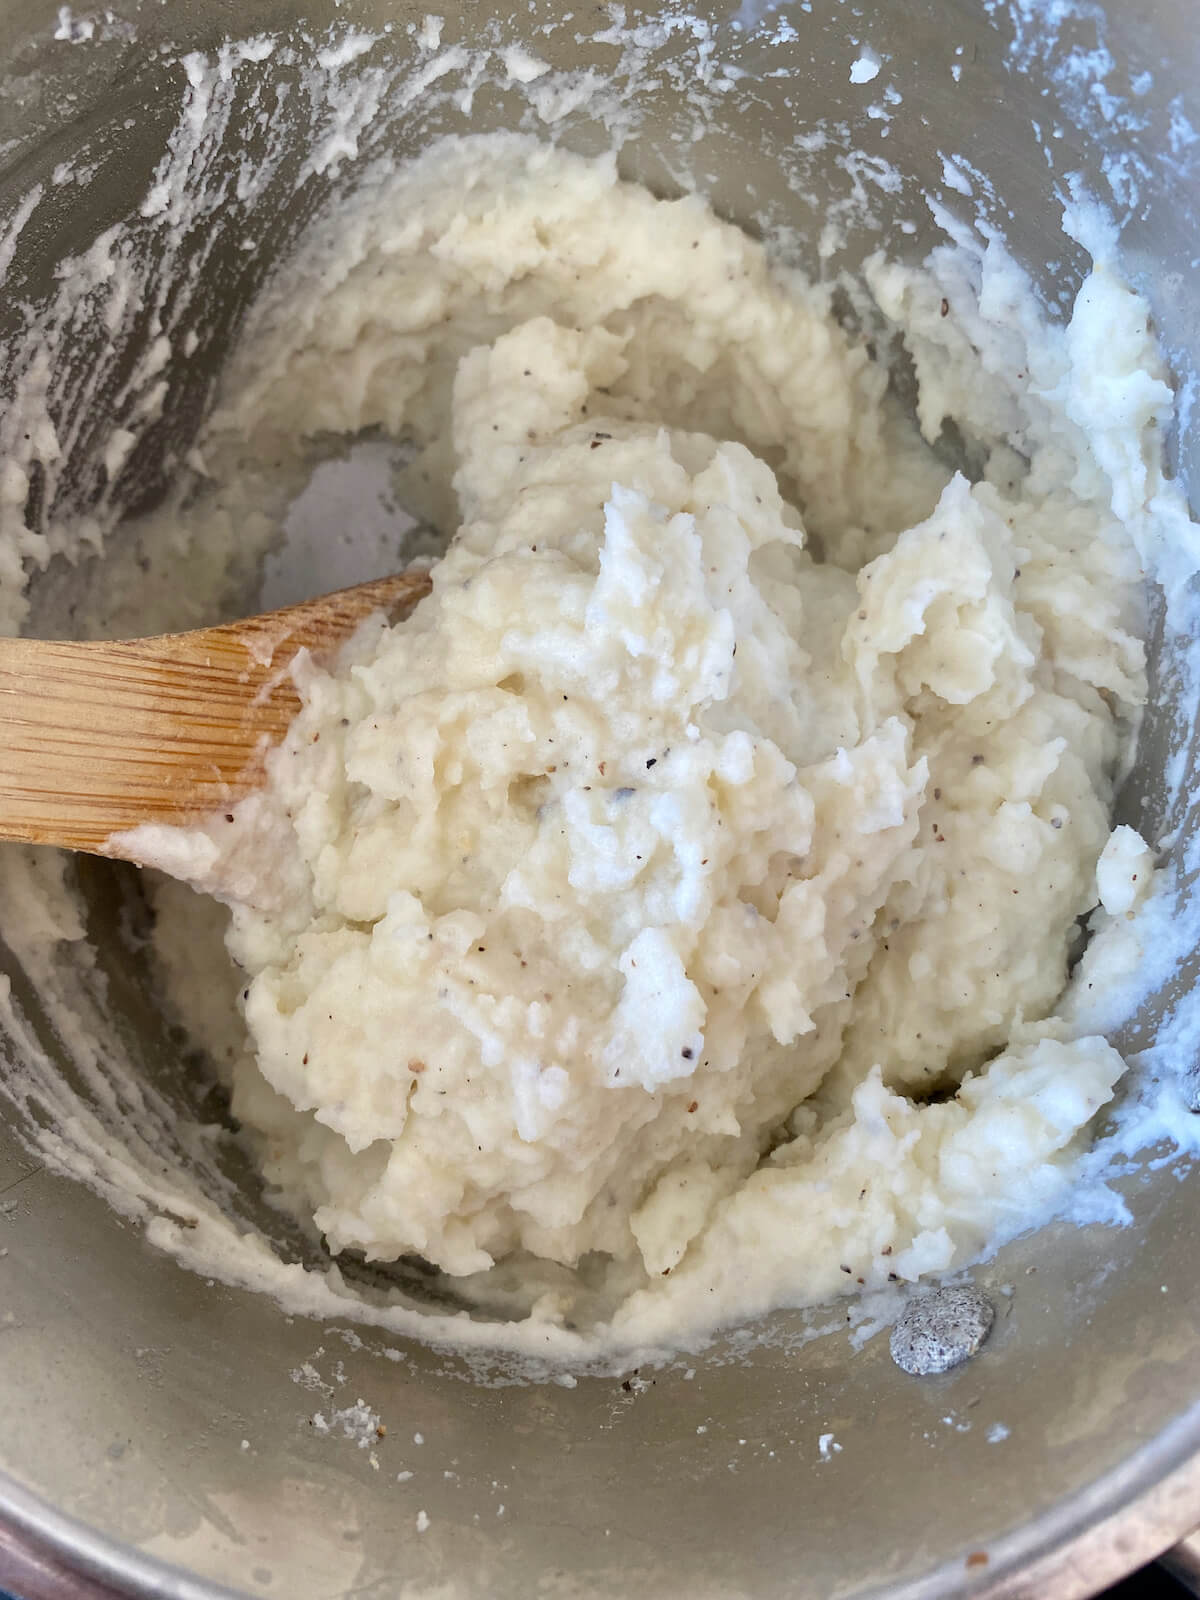 Mashed potatoes in a stainless steel pot being mixed by a wooden spoon.